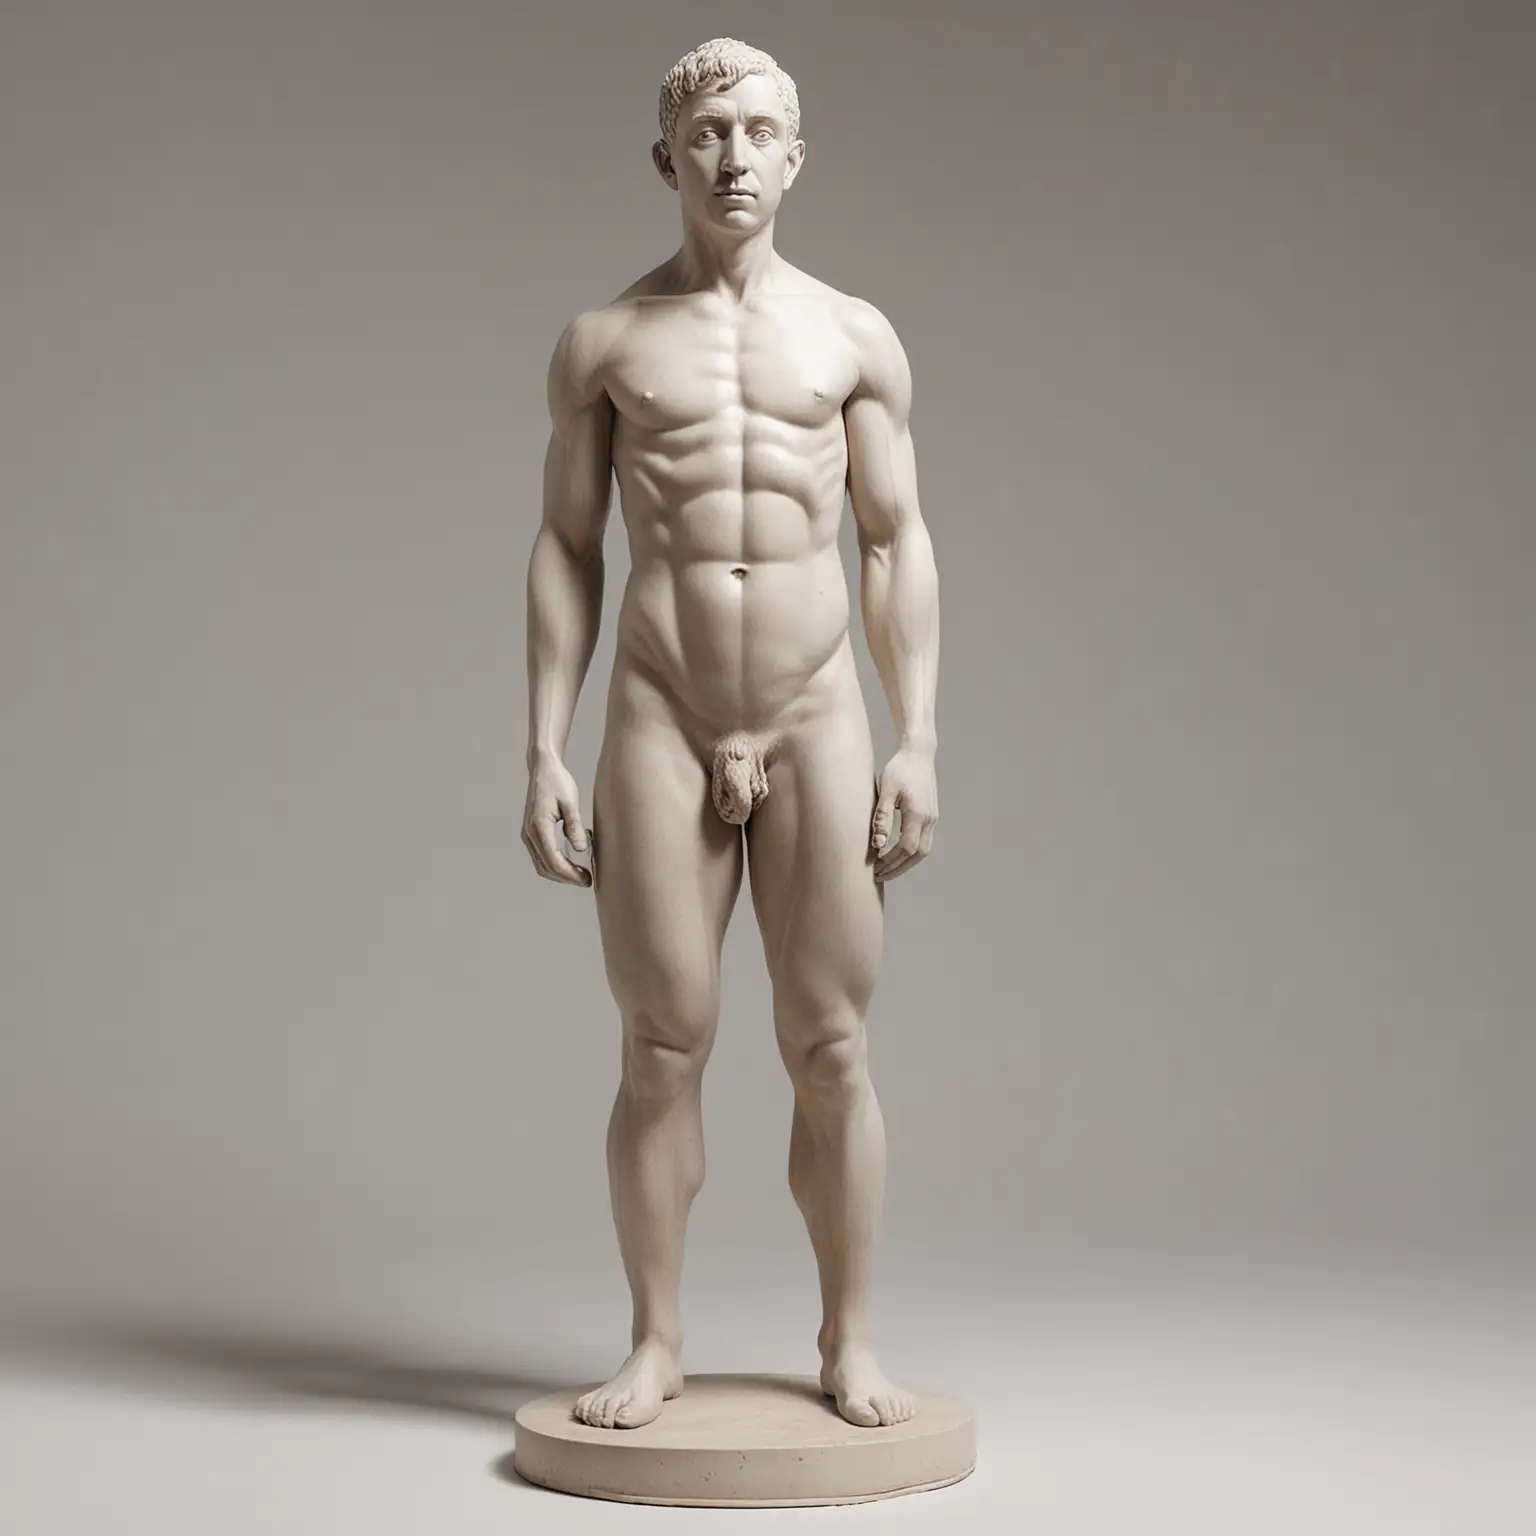 Sculpture of a Man with Unique Anatomy